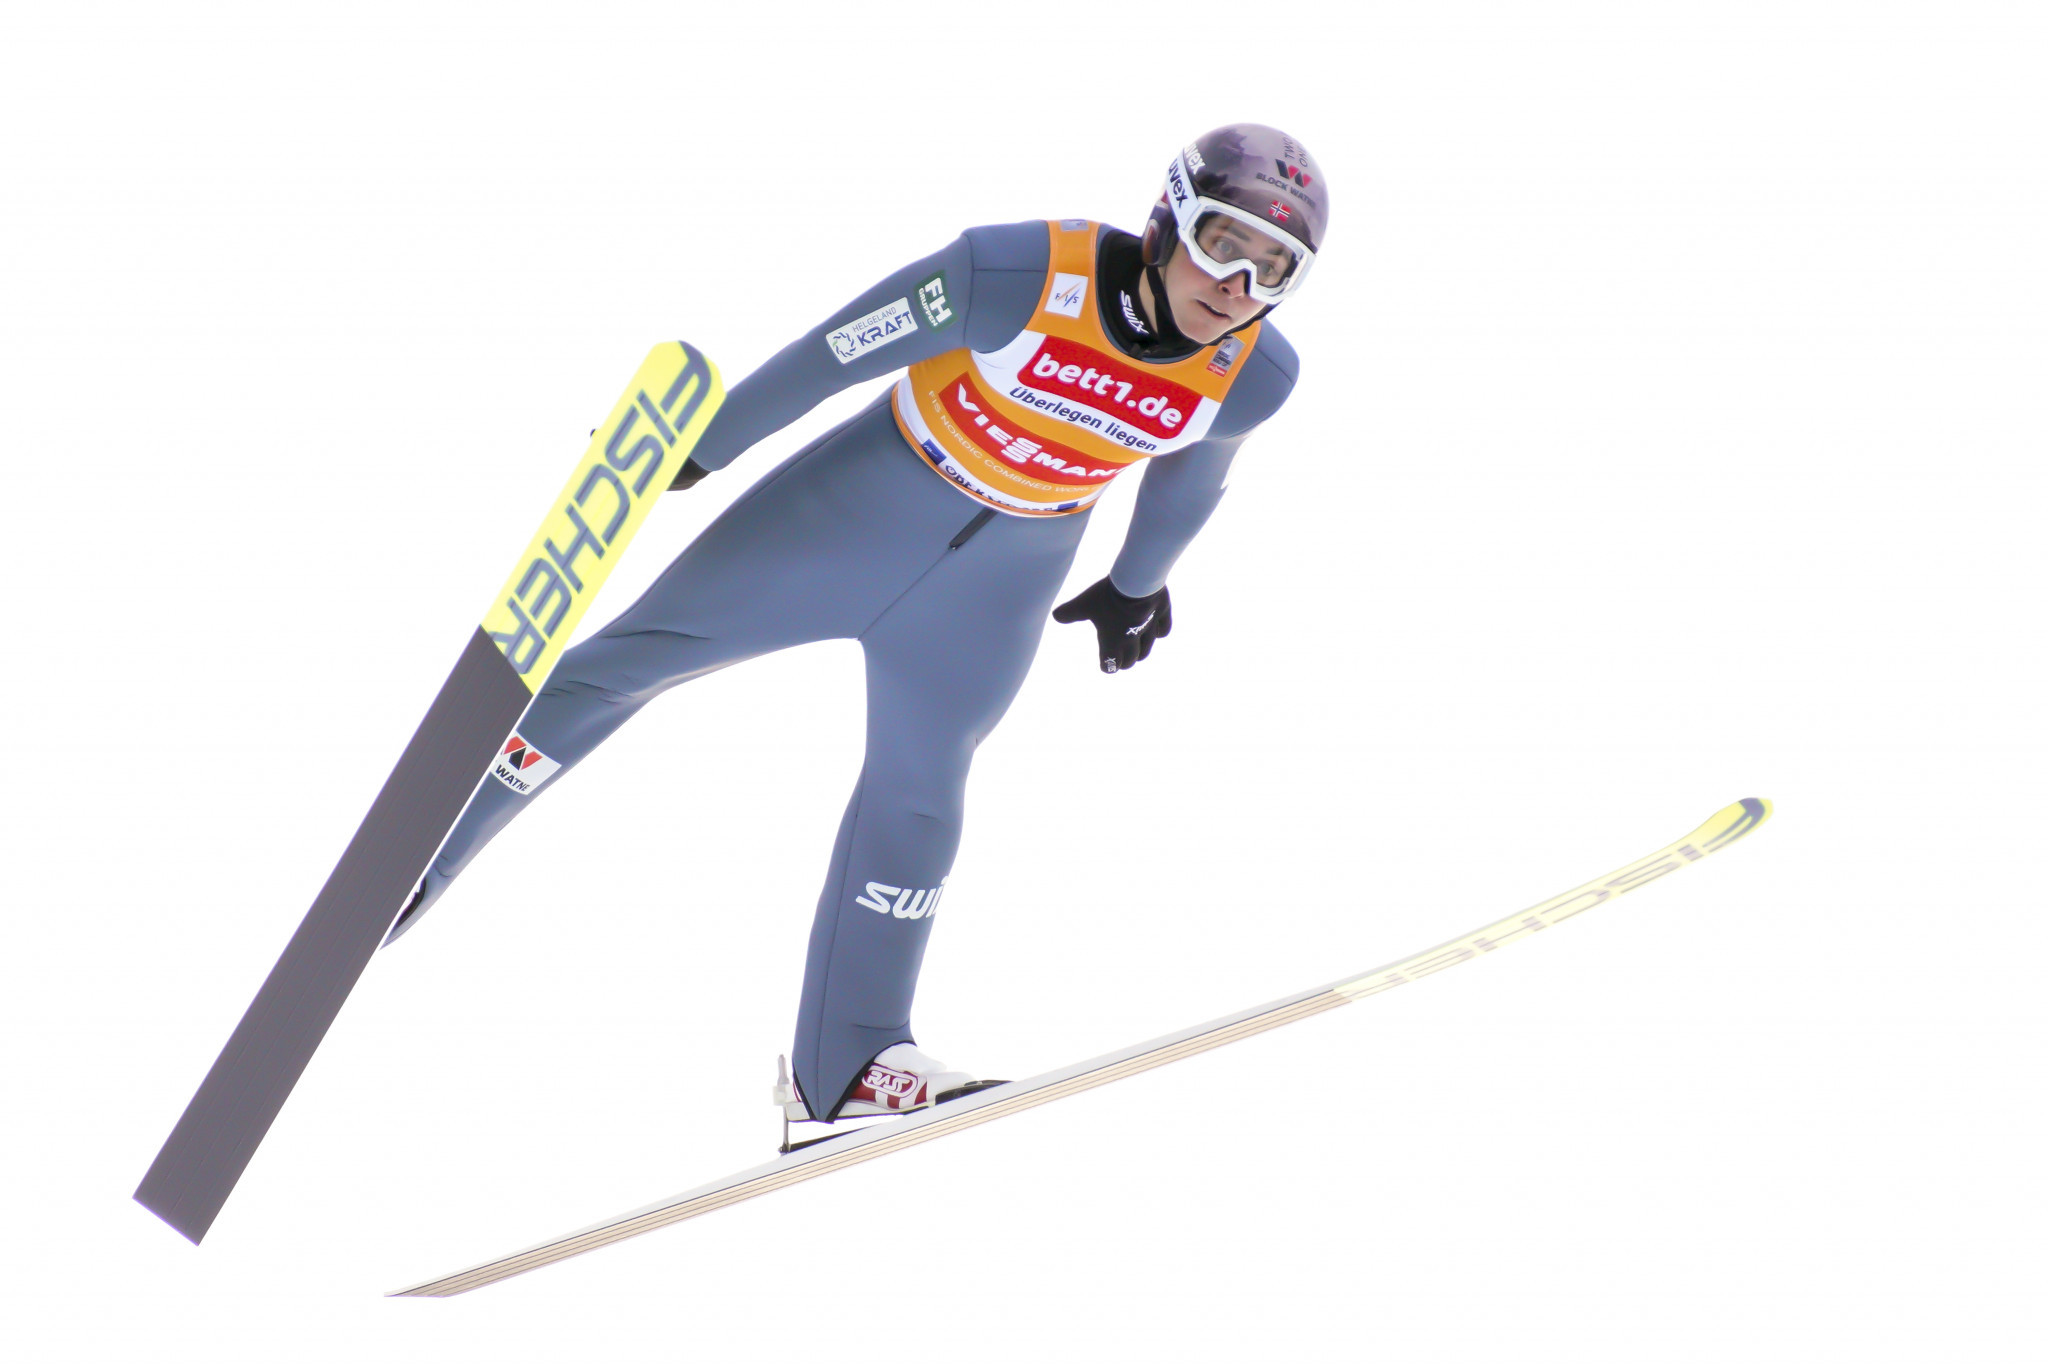 Riiber running hot as Nordic combined heads to Oberstdorf